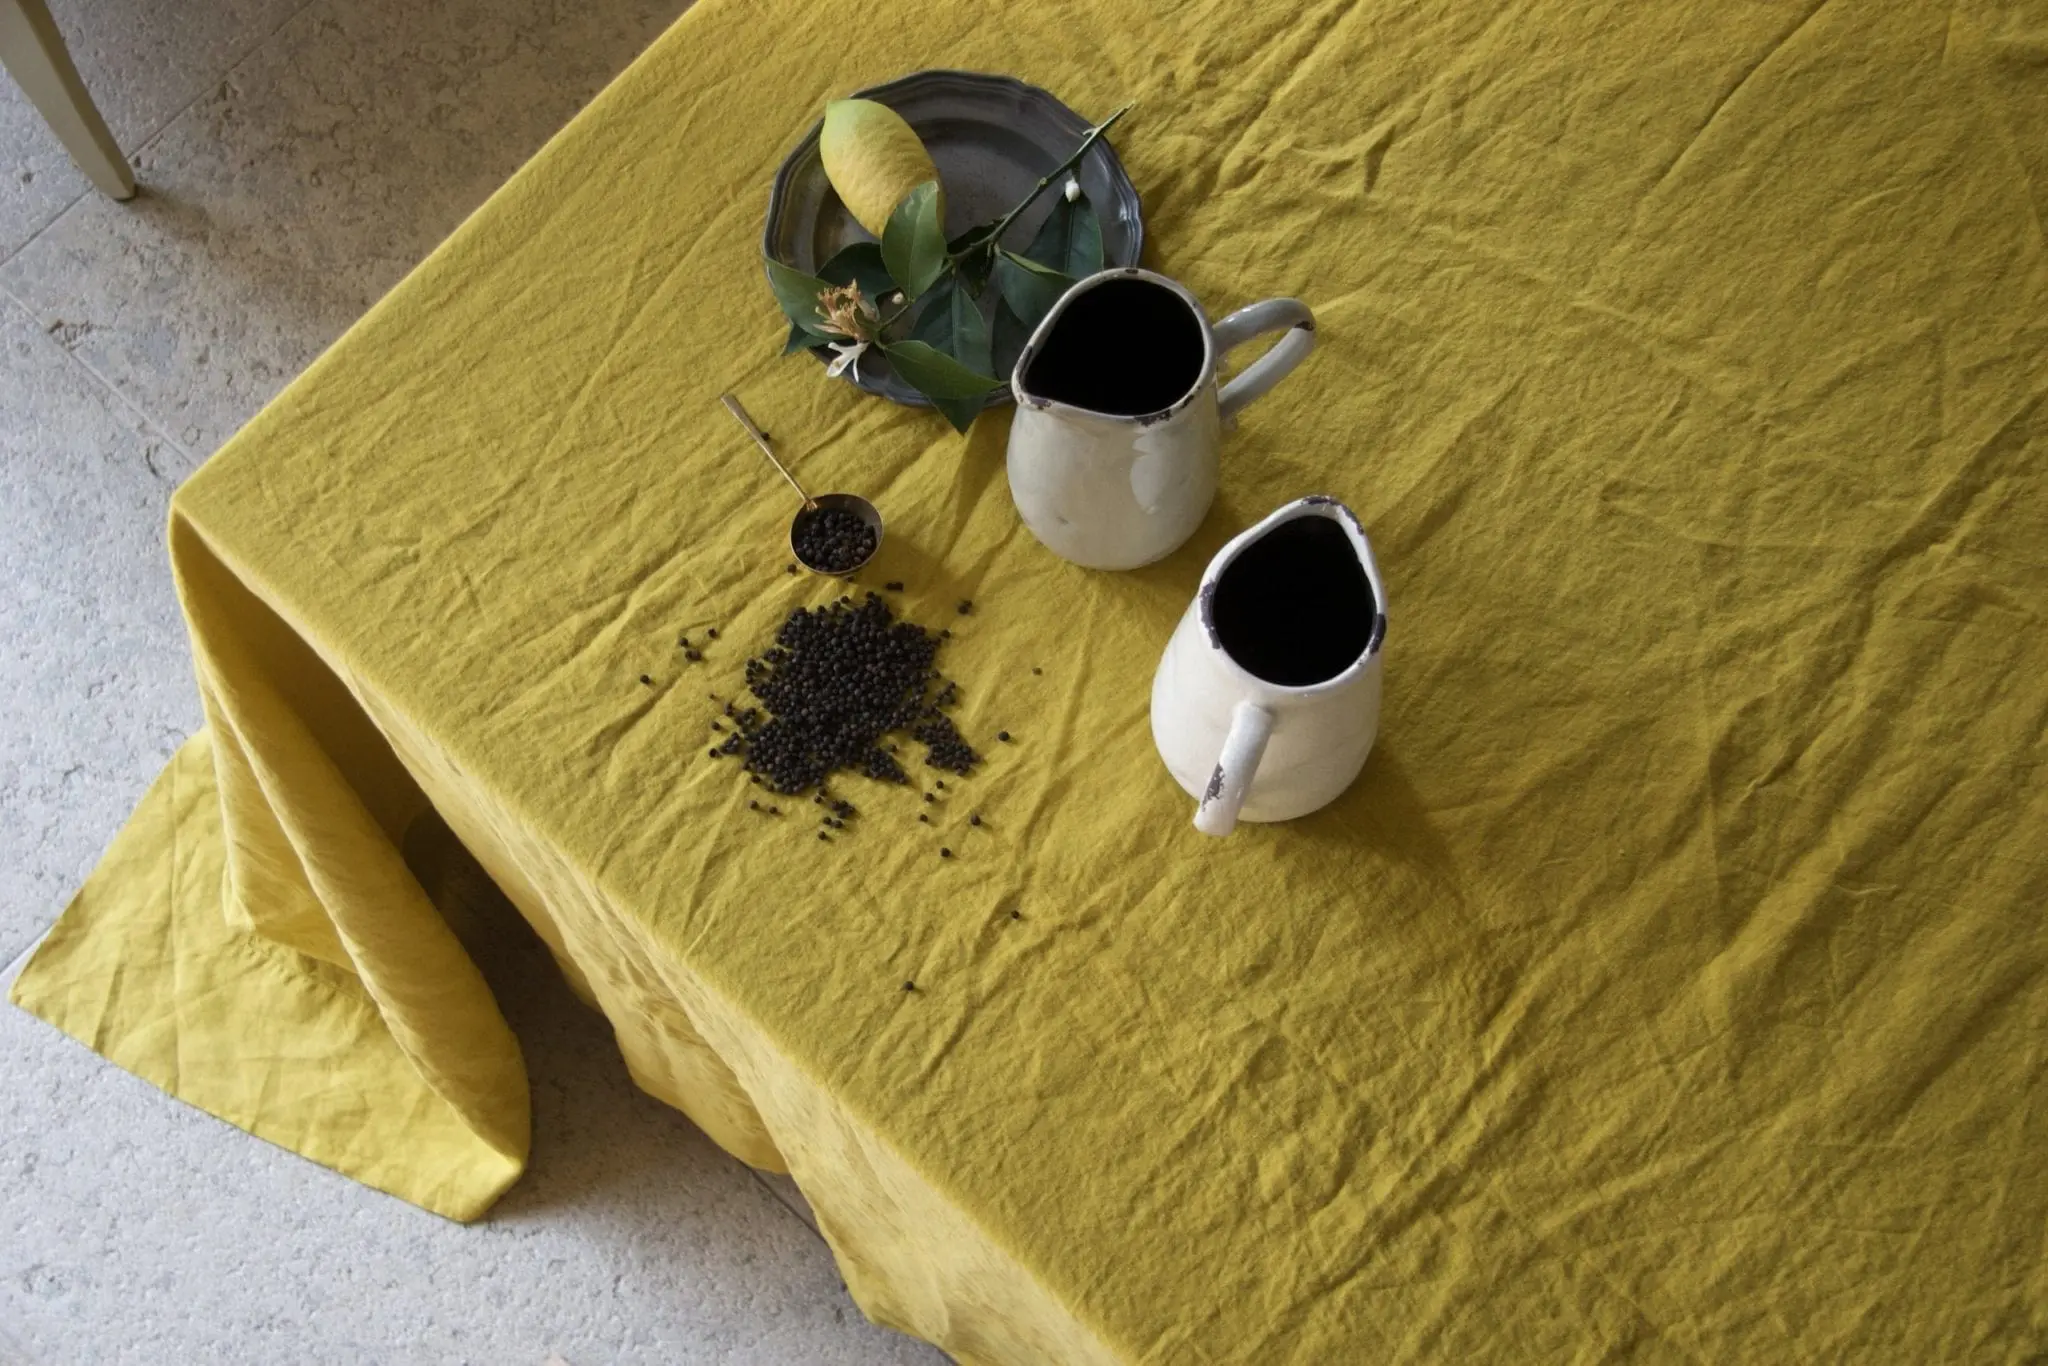 Tablecloth - Once Milano